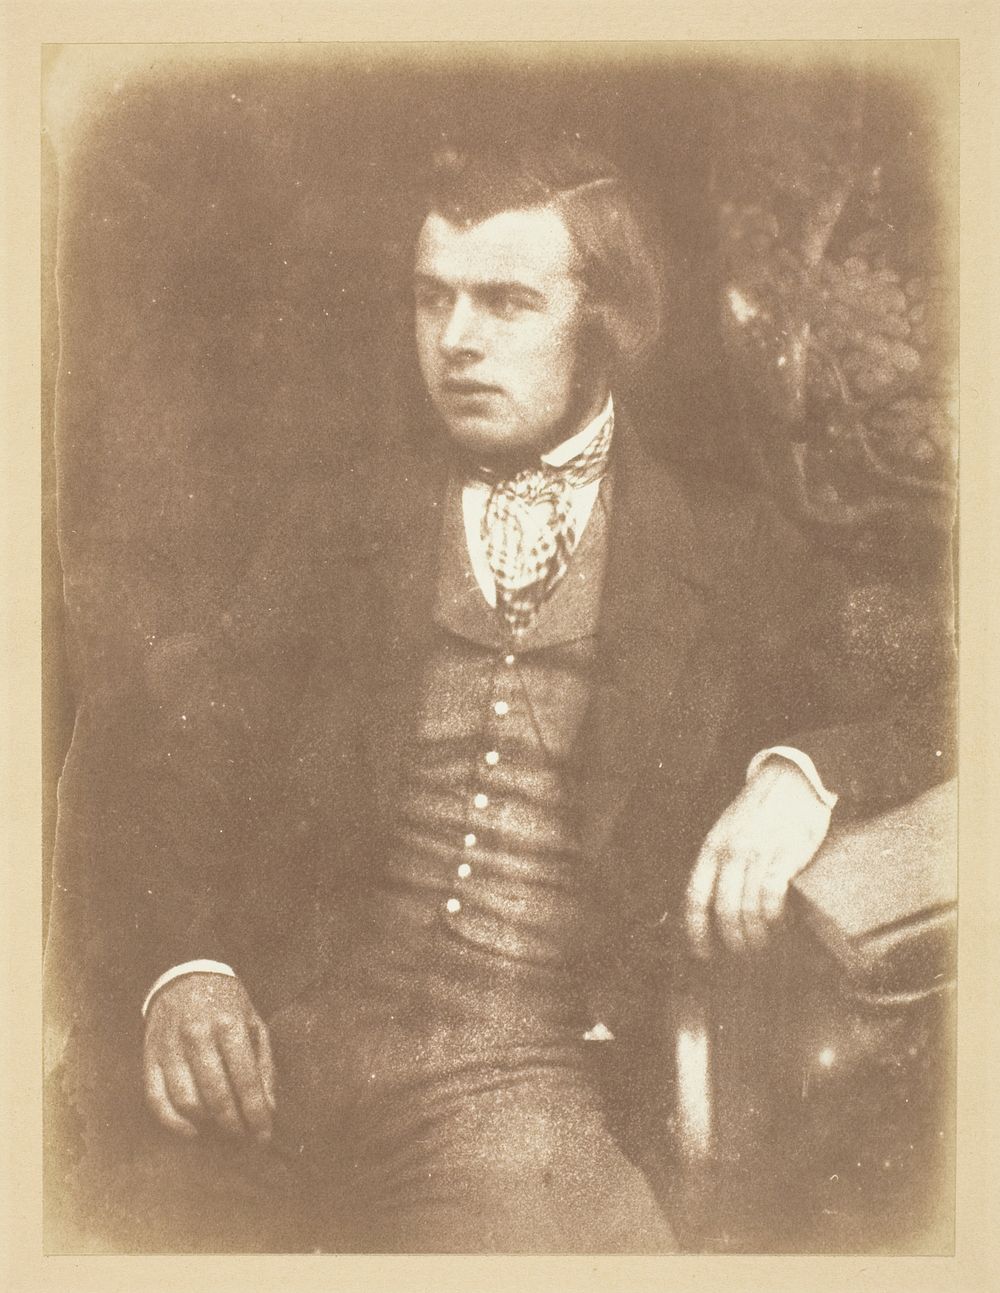 Mr. Brodie, RSA, August 25, 1845, Sculptor, Lived in Cornwell St. by David Octavius Hill